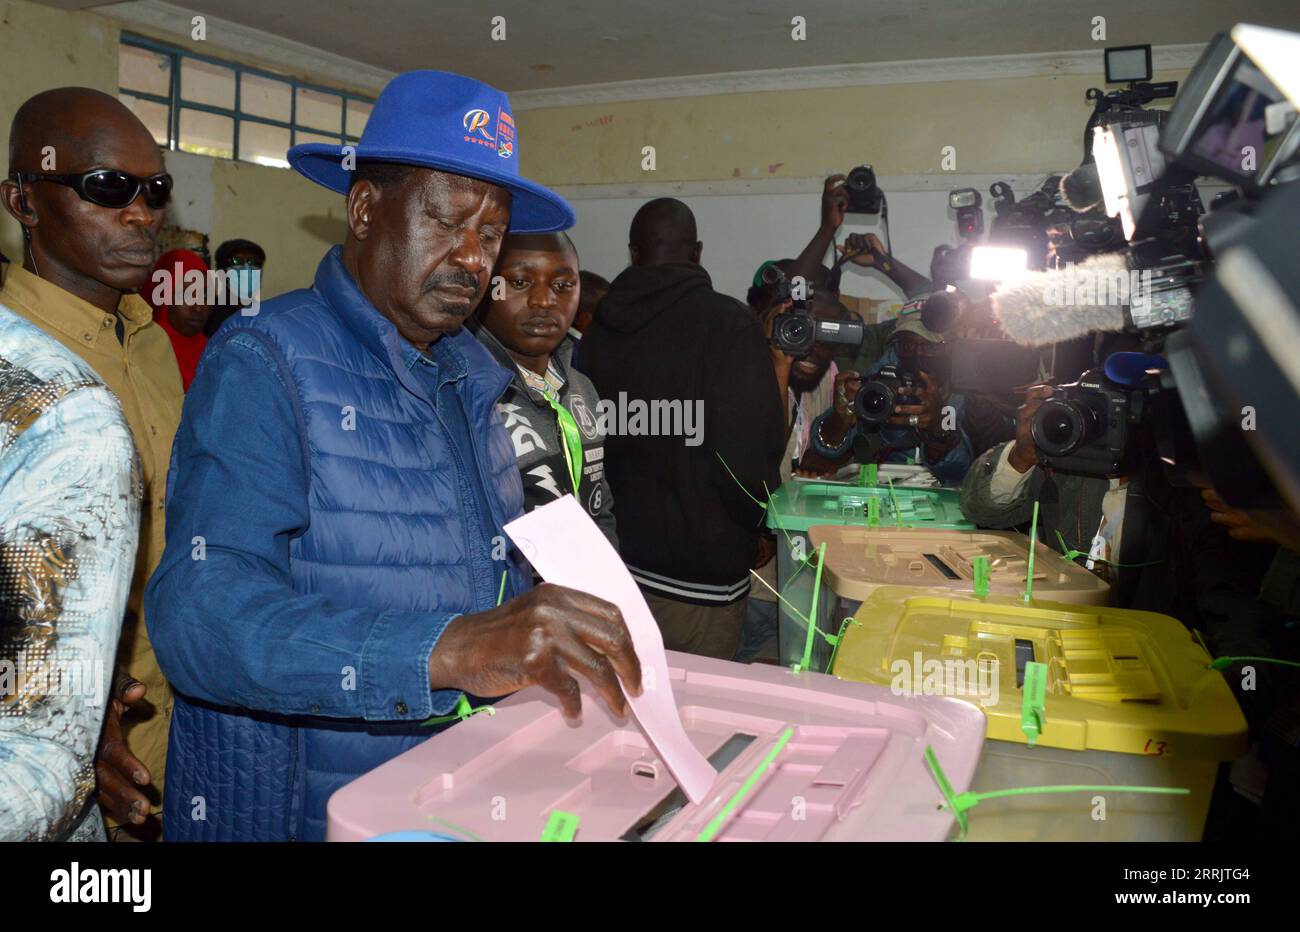 220809 -- NAIROBI, Aug. 9, 2022 -- Raila Odinga, a veteran opposition leader who is running for the presidency under the Azimio La Umoja Resolution for Unity One Kenya Coalition, casts his ballot at a polling station in Nairobi, Kenya, Aug. 9, 2022. Millions of Kenyan citizens on Tuesday morning cast their ballots at about 46,229 polling stations across the country to elect their fifth president as well as members of the National Assembly, senators, and county governors. Photo by /Xinhua KENYA-GENERAL ELECTIONS-VOTING CharlesxOnyango PUBLICATIONxNOTxINxCHN Stock Photo